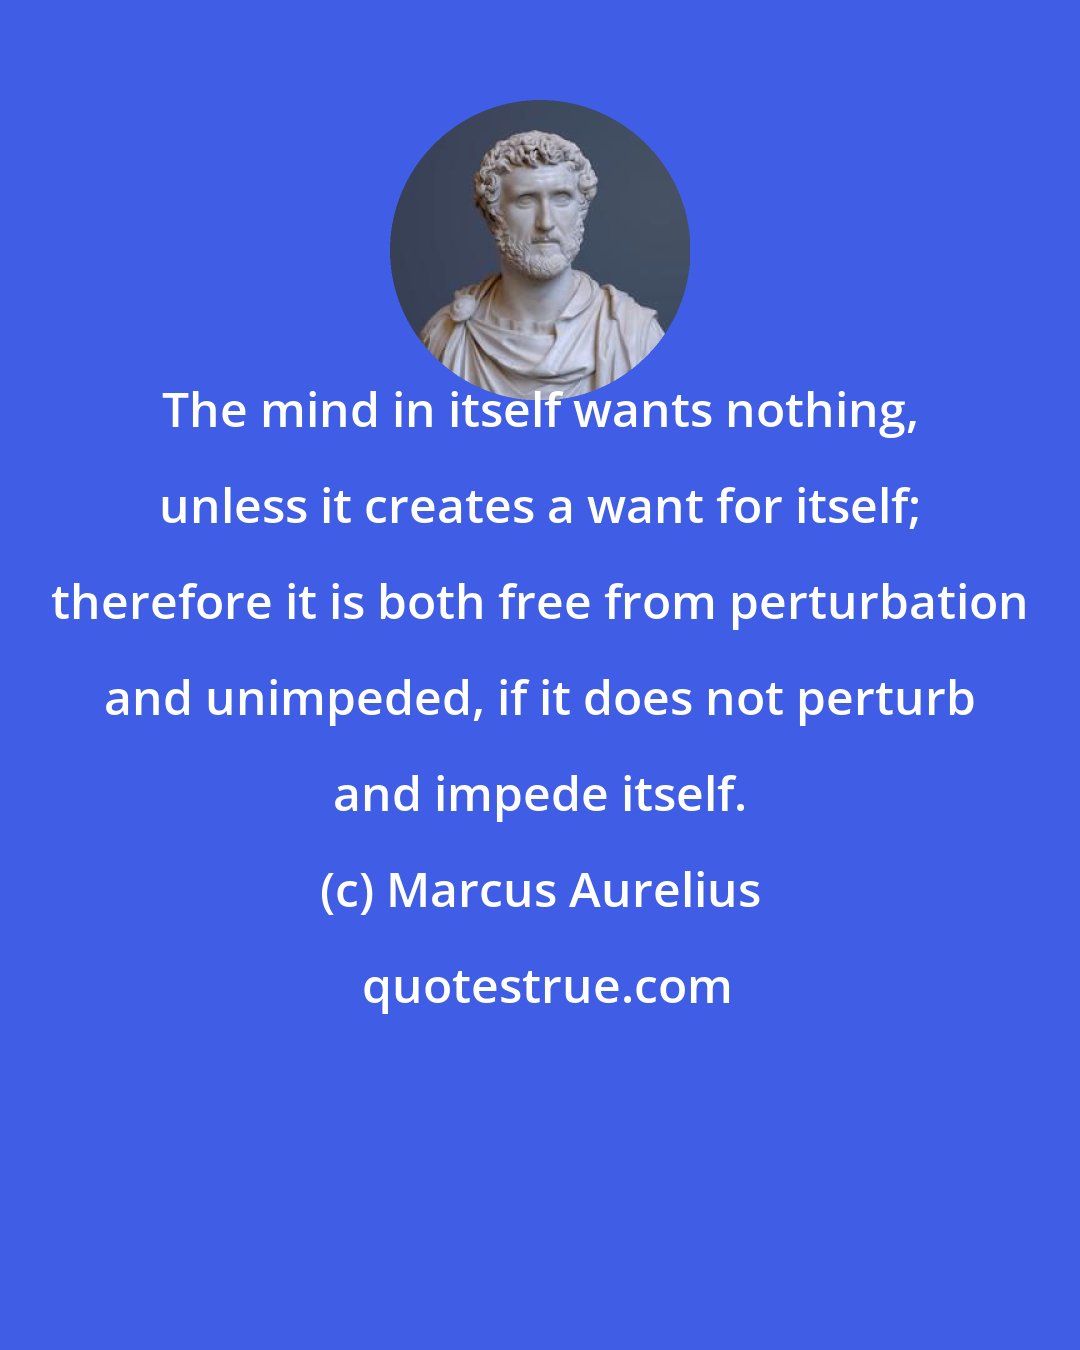 Marcus Aurelius: The mind in itself wants nothing, unless it creates a want for itself; therefore it is both free from perturbation and unimpeded, if it does not perturb and impede itself.